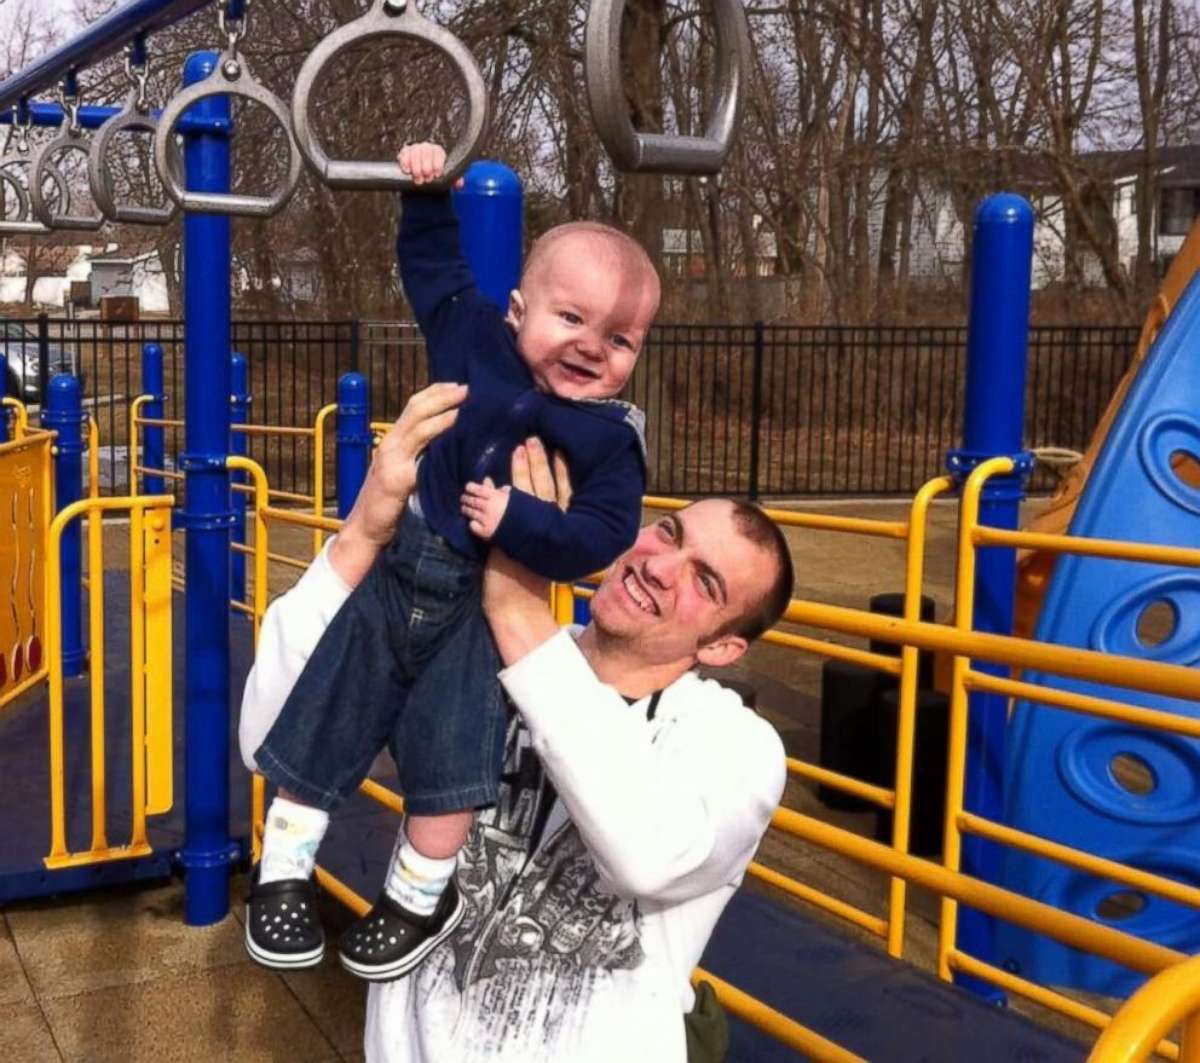 PHOTO: Parker Mantia, 1, and his father, Corey Mantia, died after a drunk driver hit the family's vehicle on Sept. 20, 2014.